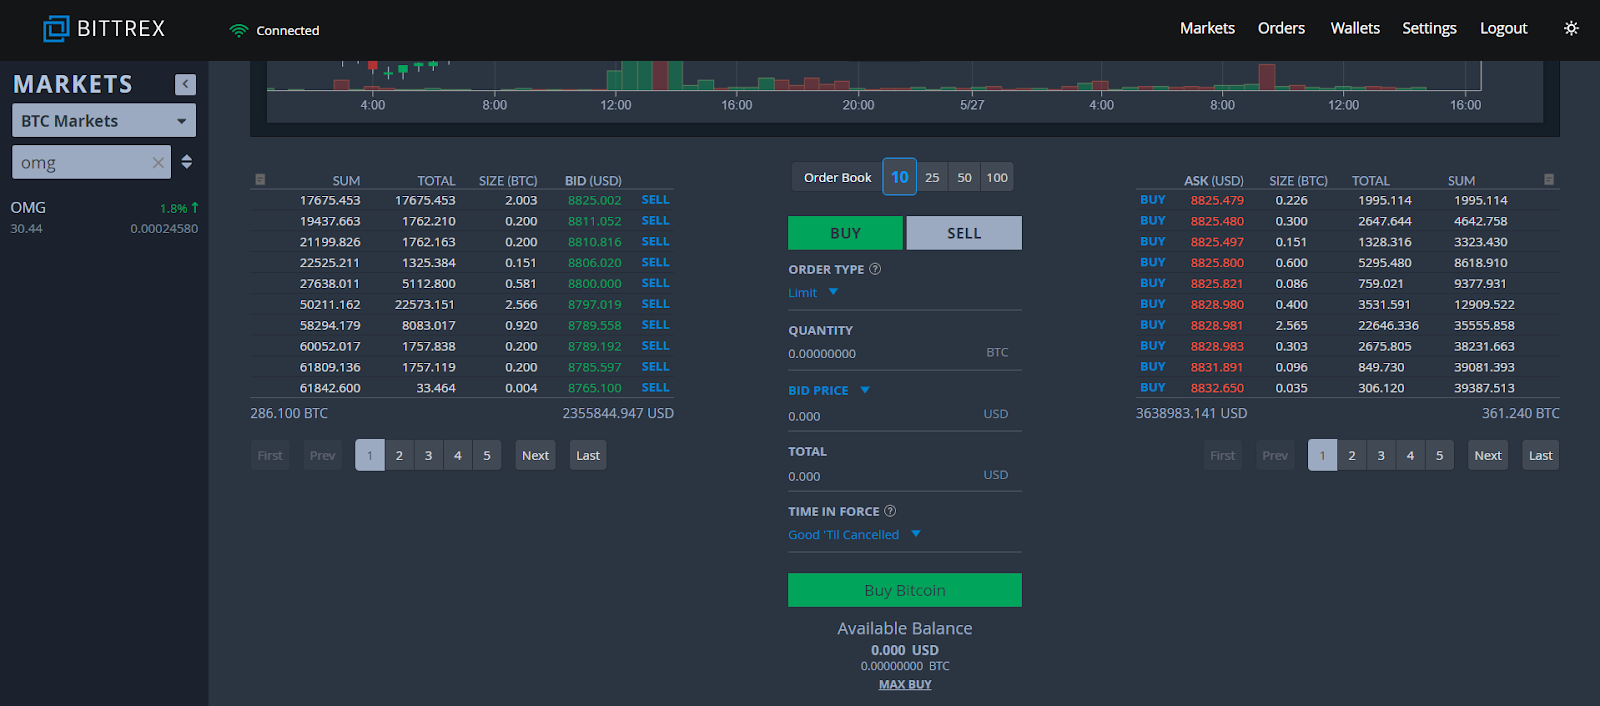 How to Buy and Sell on Bittrex, Step by Step - Bitcoin Market Journal